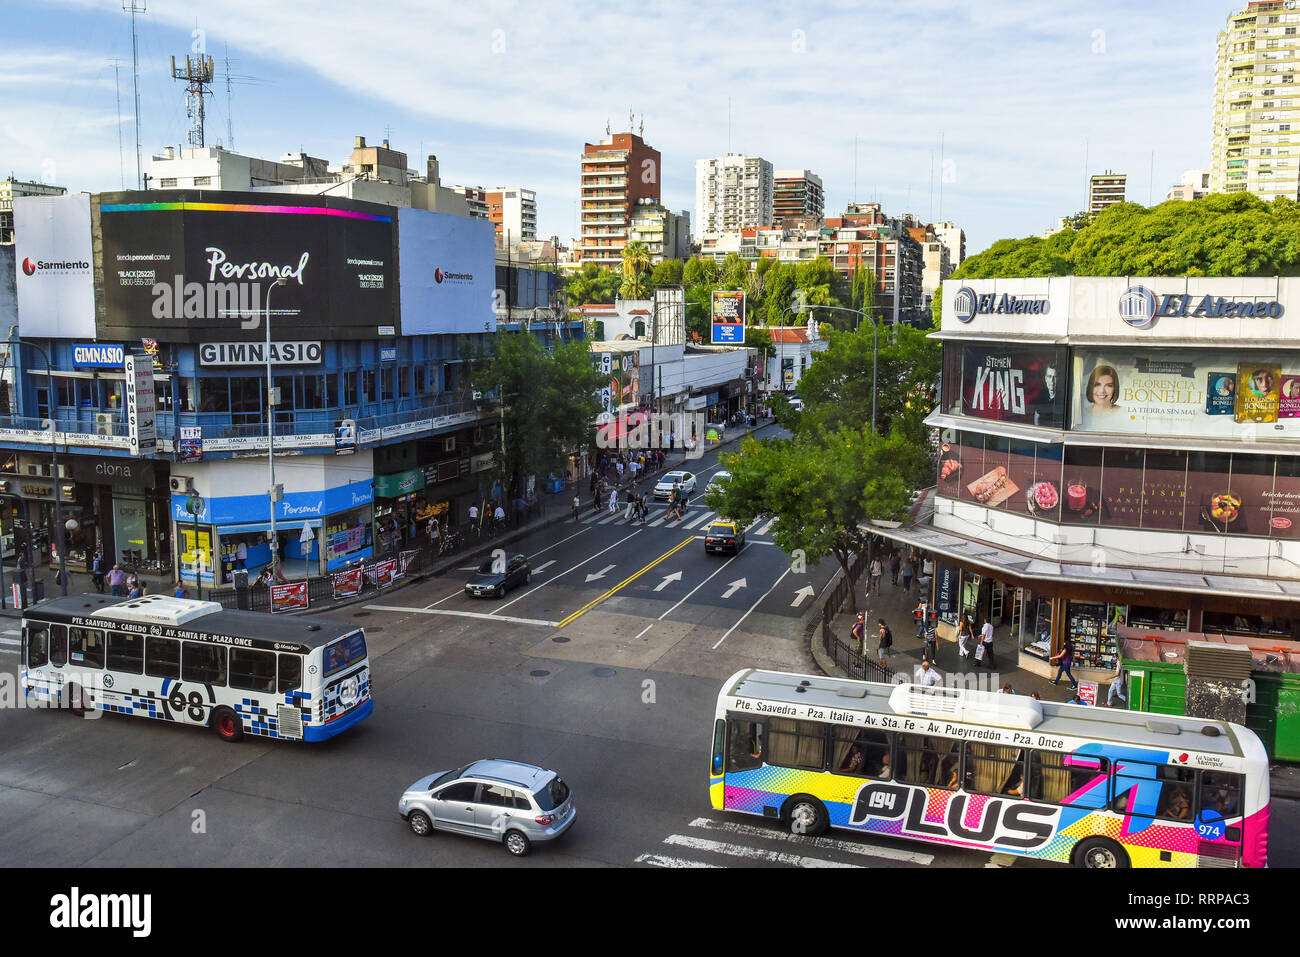 Buenos Aires, Argentina - 17 Mar, 2016: Aerial daytime view of the Cabildo Avenue with buses and pedestrians. Stock Photo